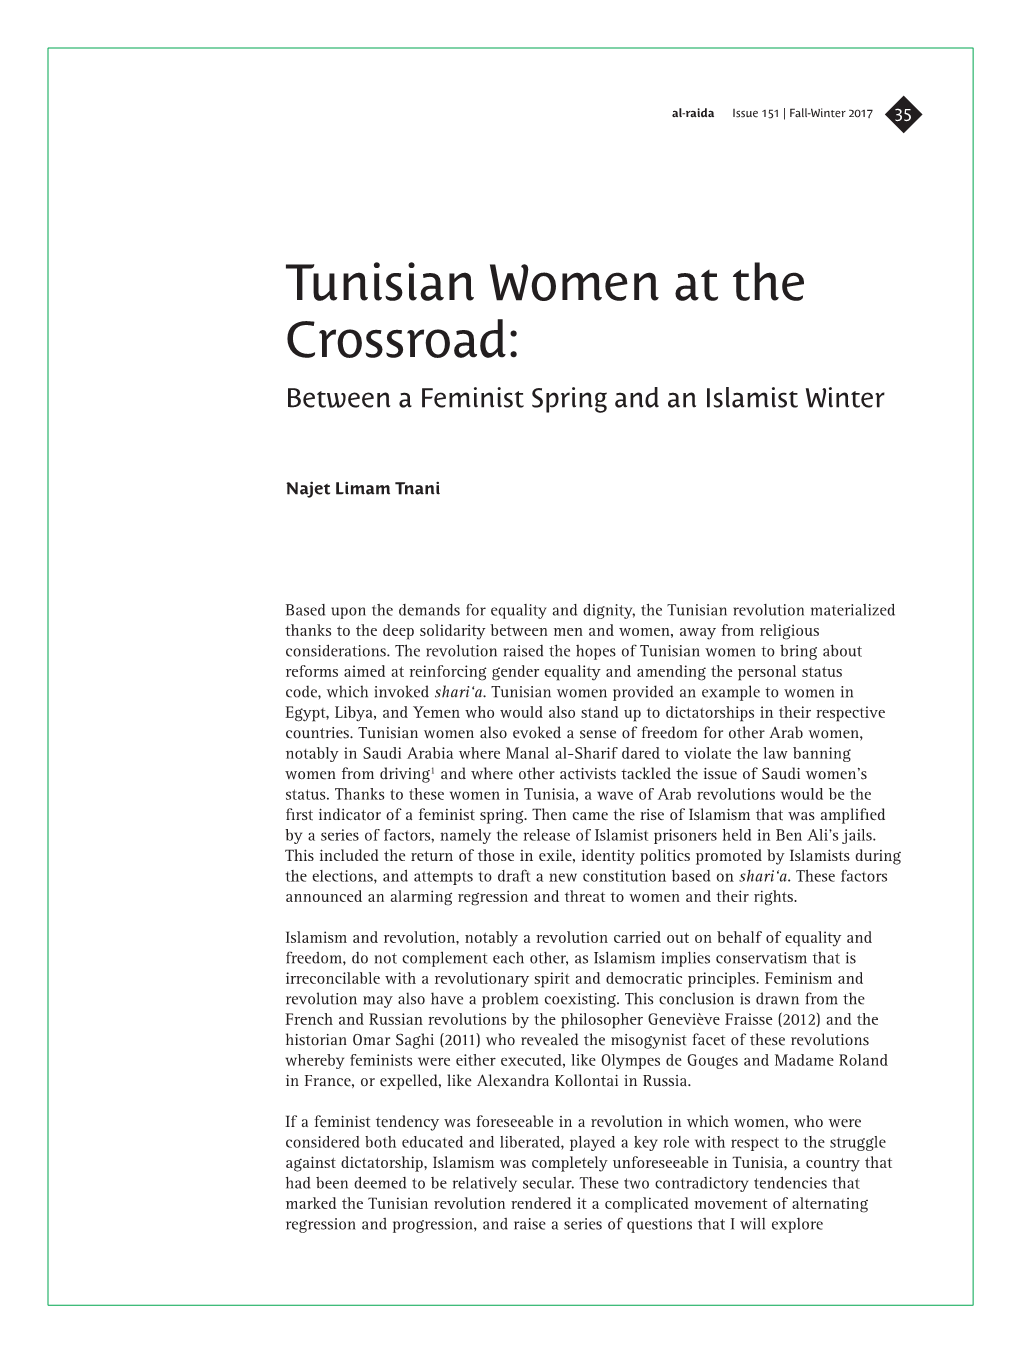 Tunisian Women at the Crossroad: Between a Feminist Spring and an Islamist Winter